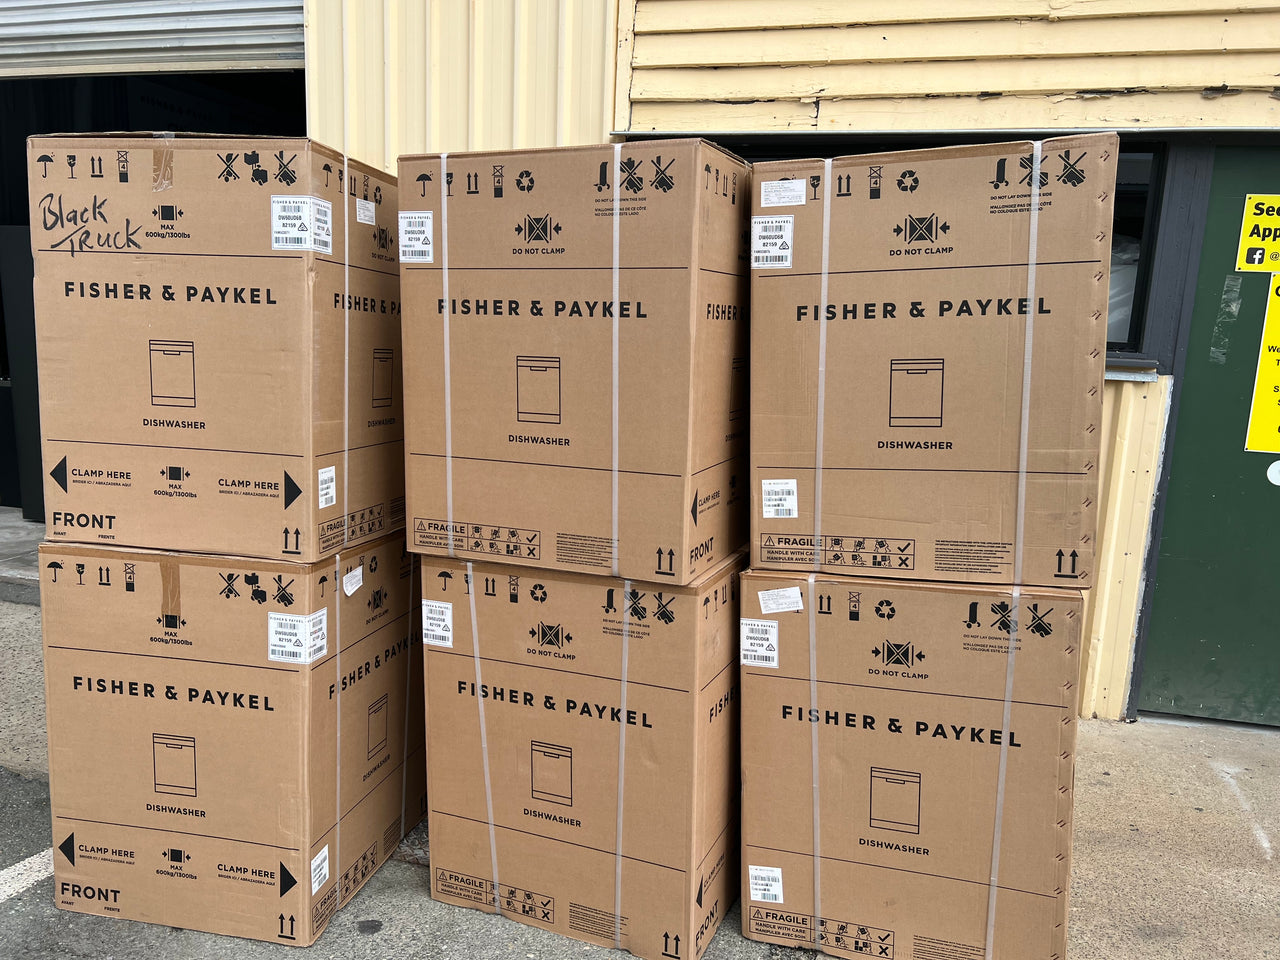 Factory second Fisher & Paykel Series 7 60cm Built-Under Dishwasher DW60UD6B IN BOXIN BOX - Second Hand Appliances Geebung